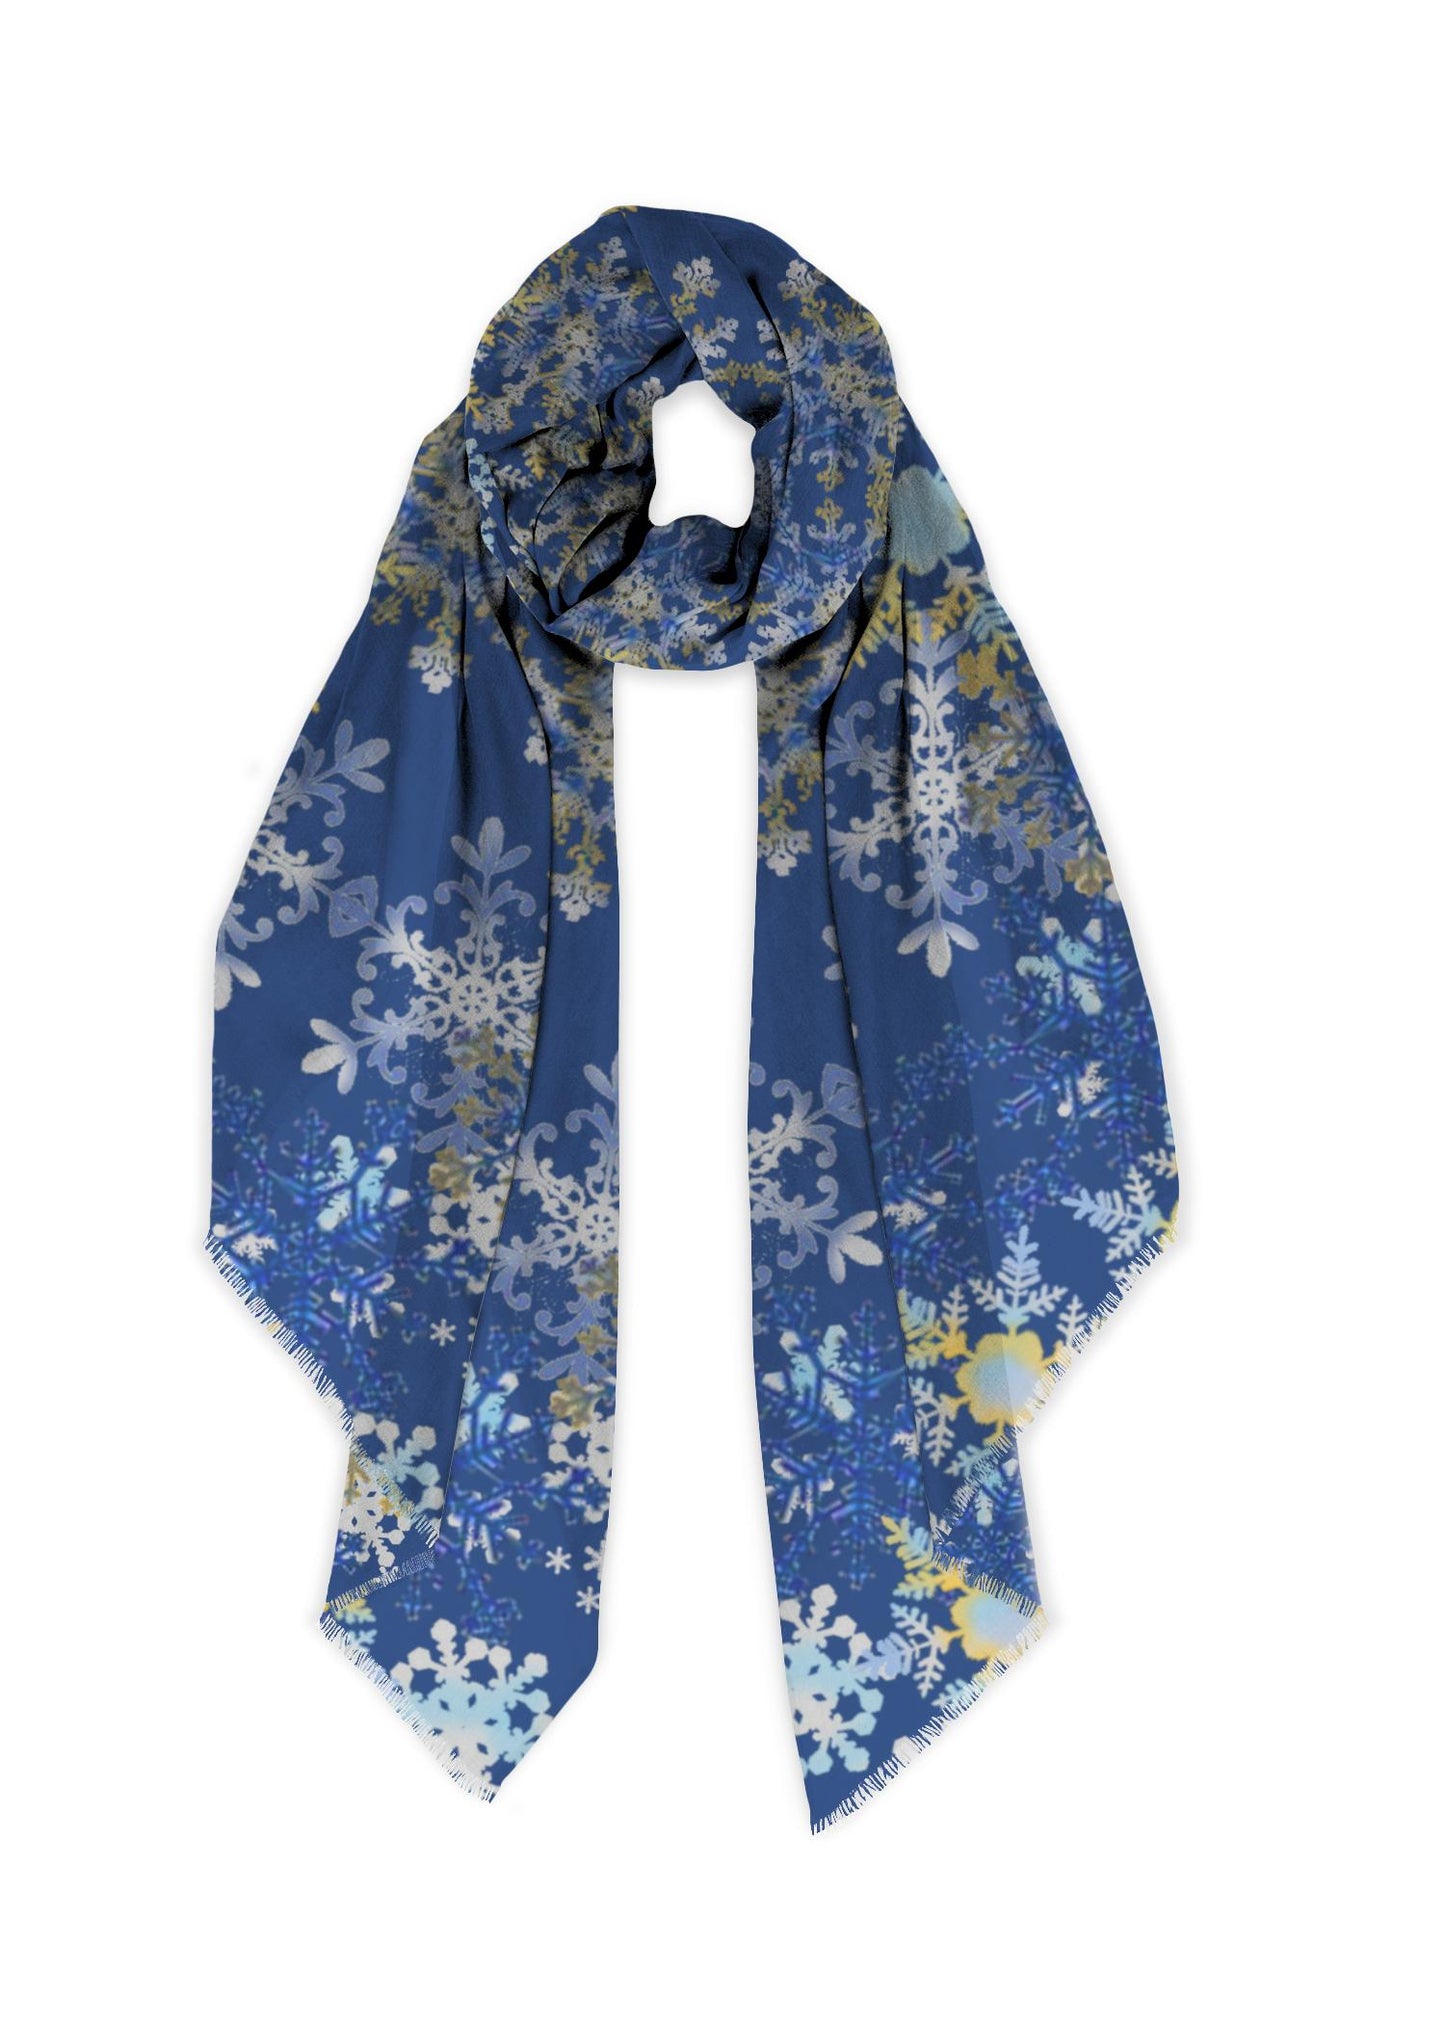 snowflakes of silver and gold cover this soooo soft scarf.  Perfect for plus size.